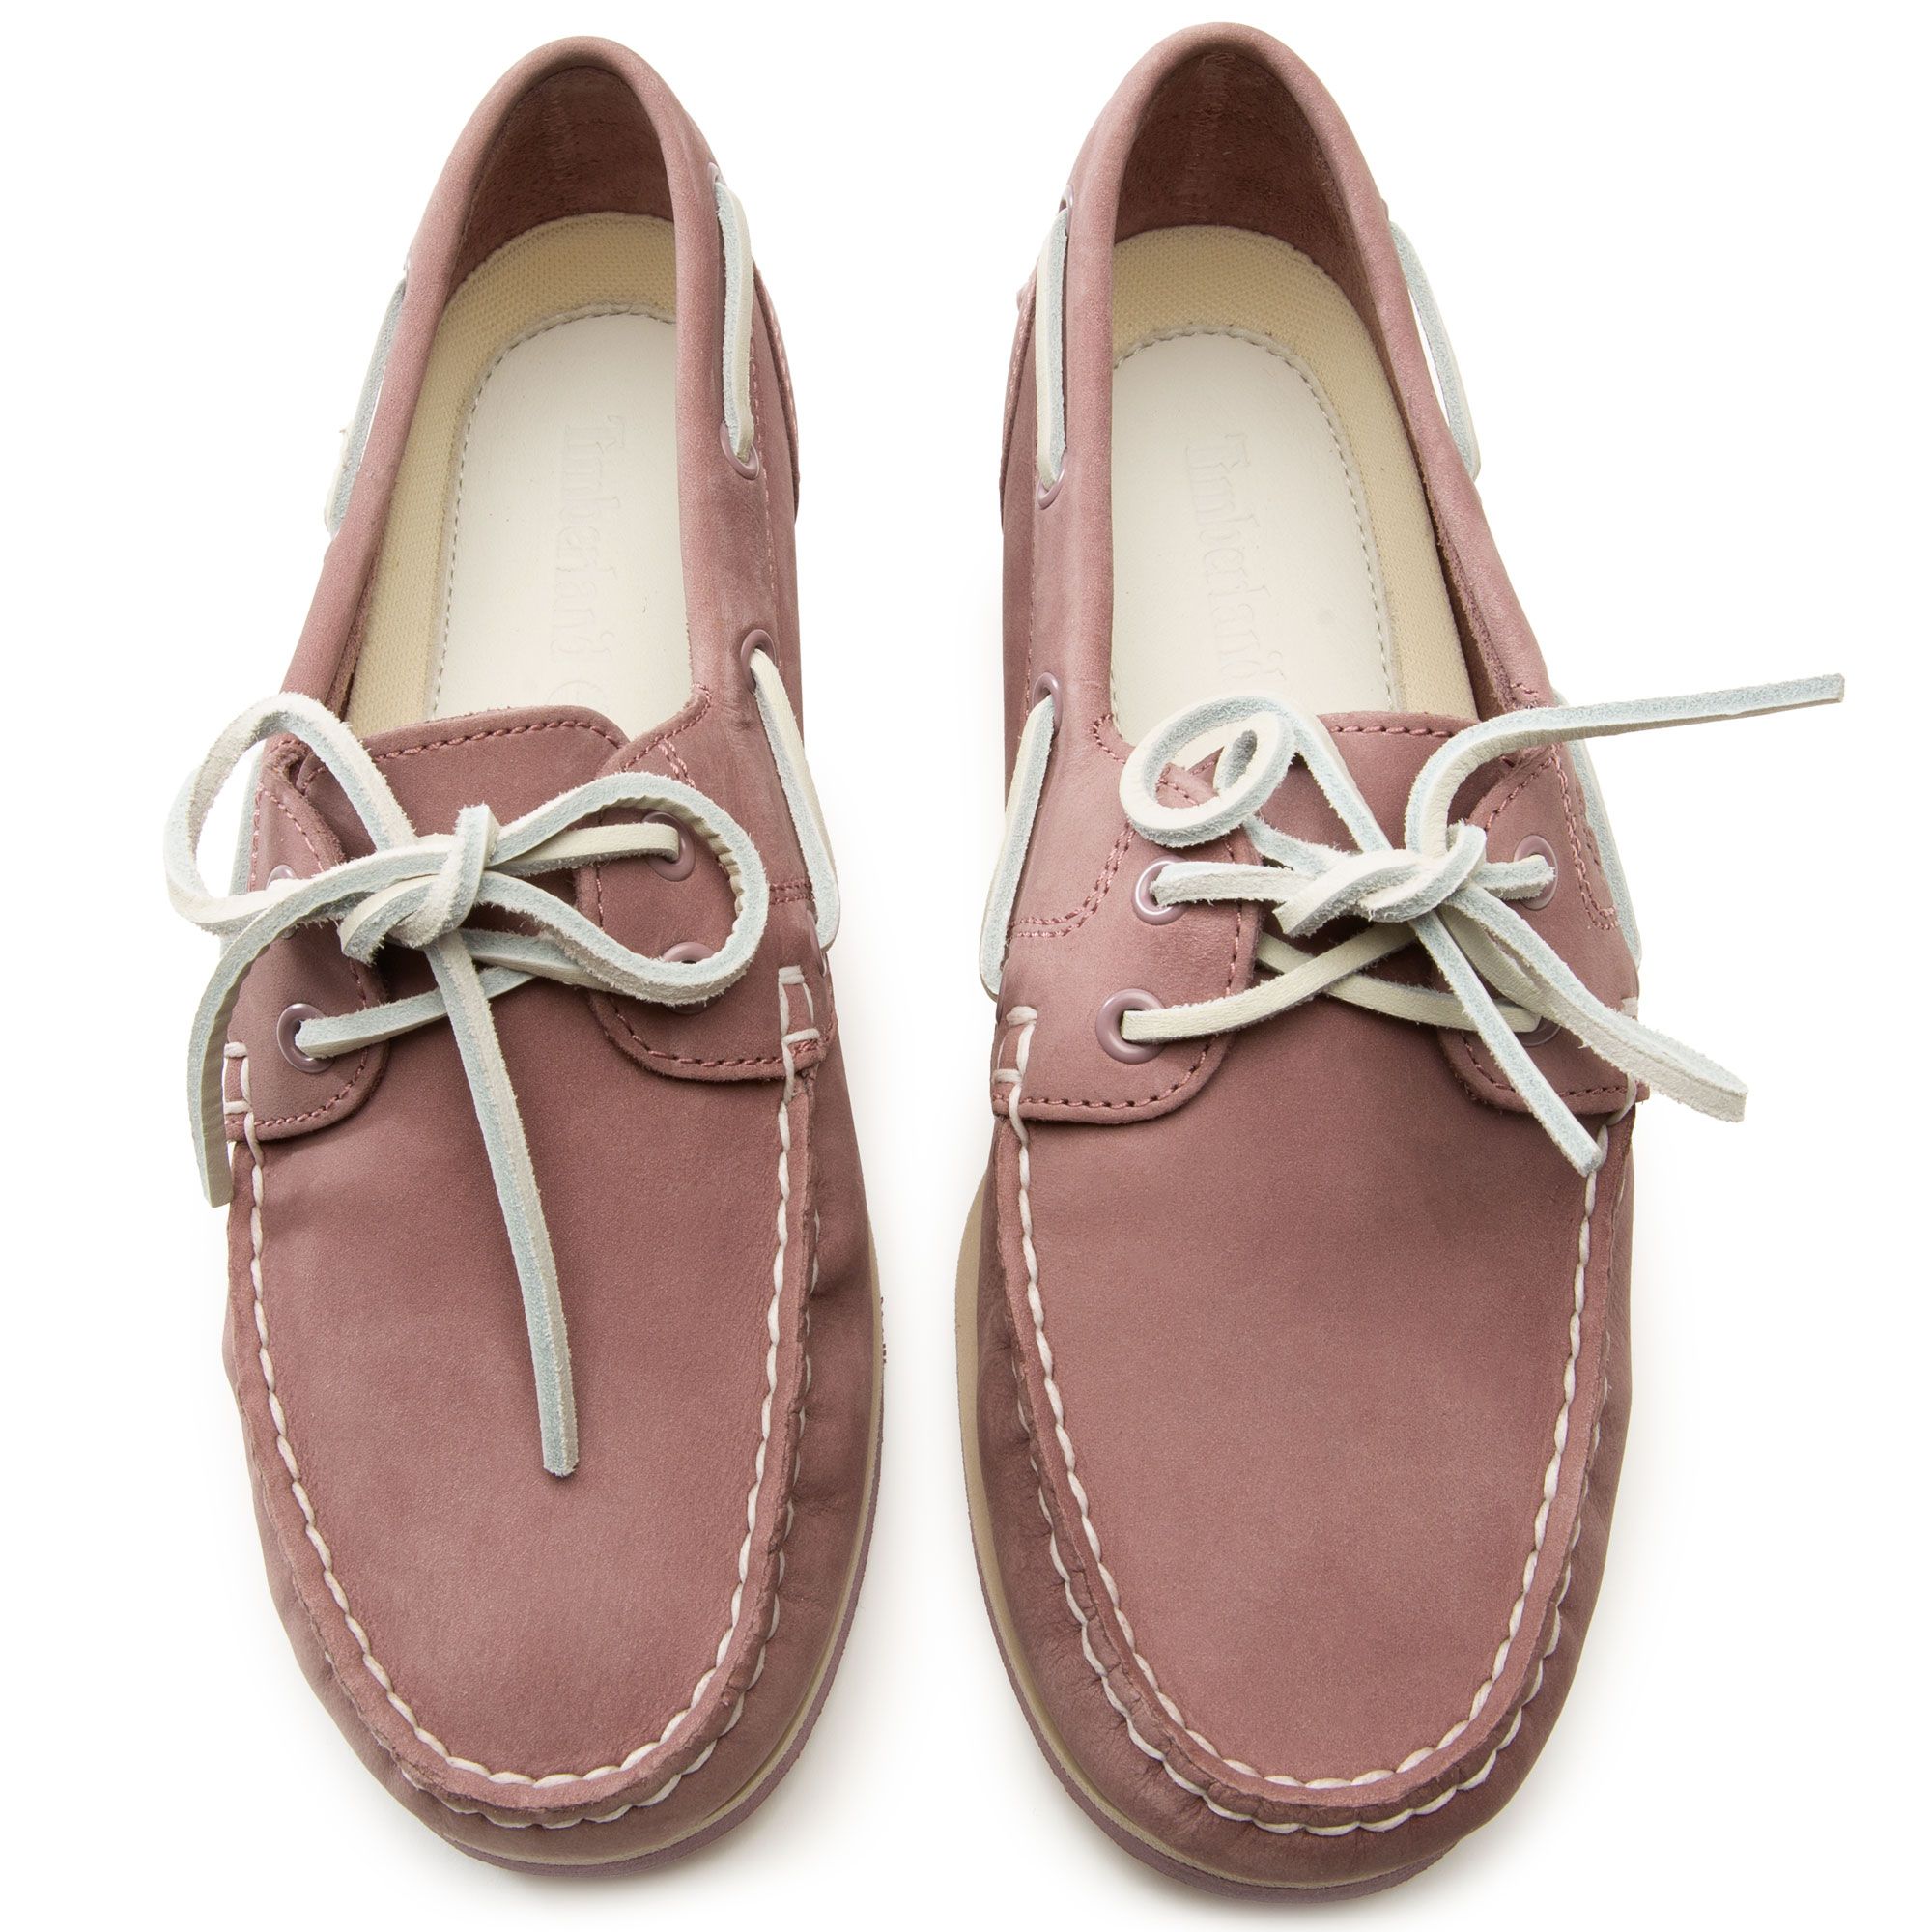 TIMBERLAND Classic 2-Eye Leather Boat Shoe TB0A27TYCL4 - Shiekh